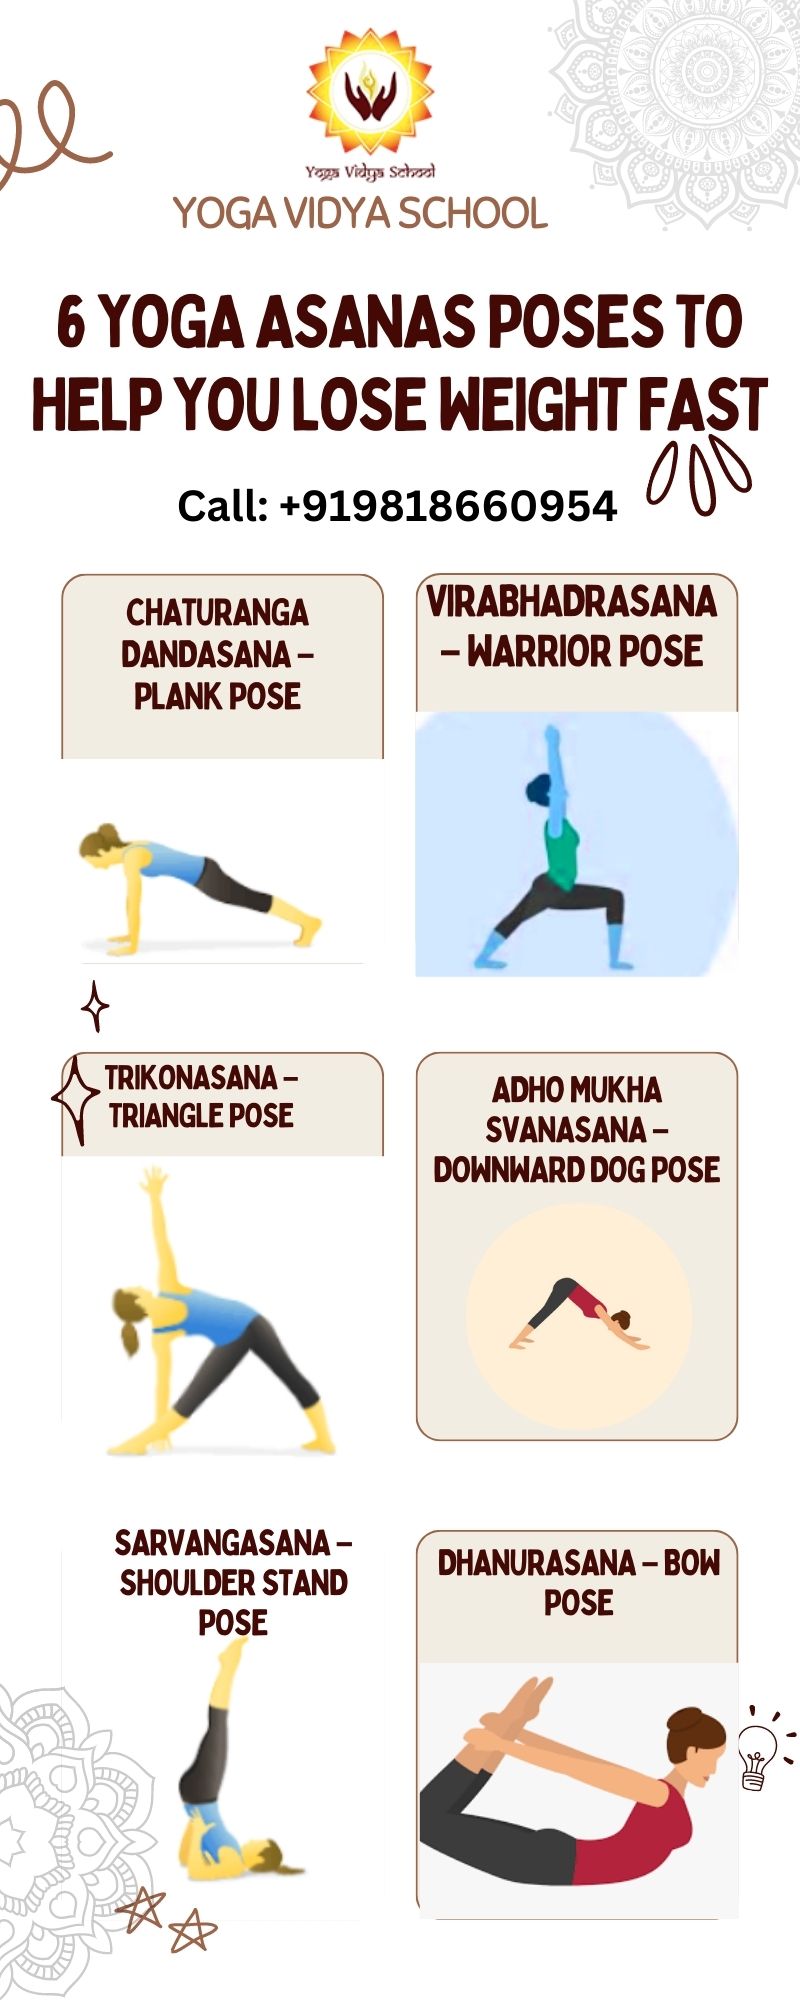 6 Yoga Asanas Poses to Help You Lose Weight Fast by